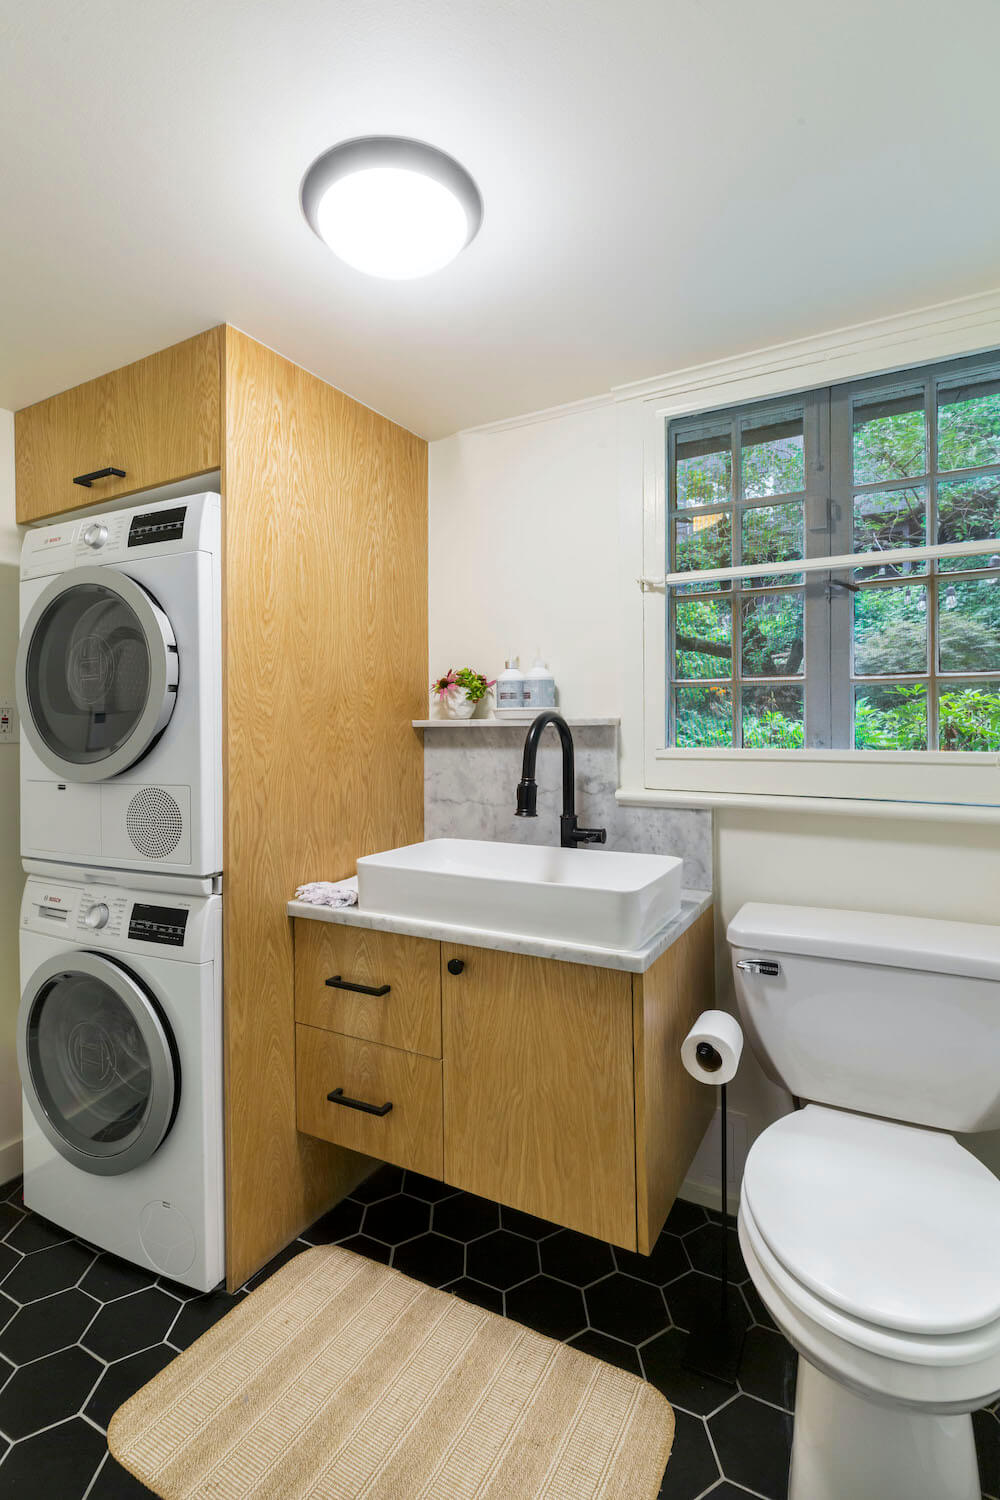 Here's How to Add a Washer and Dryer to Your Home